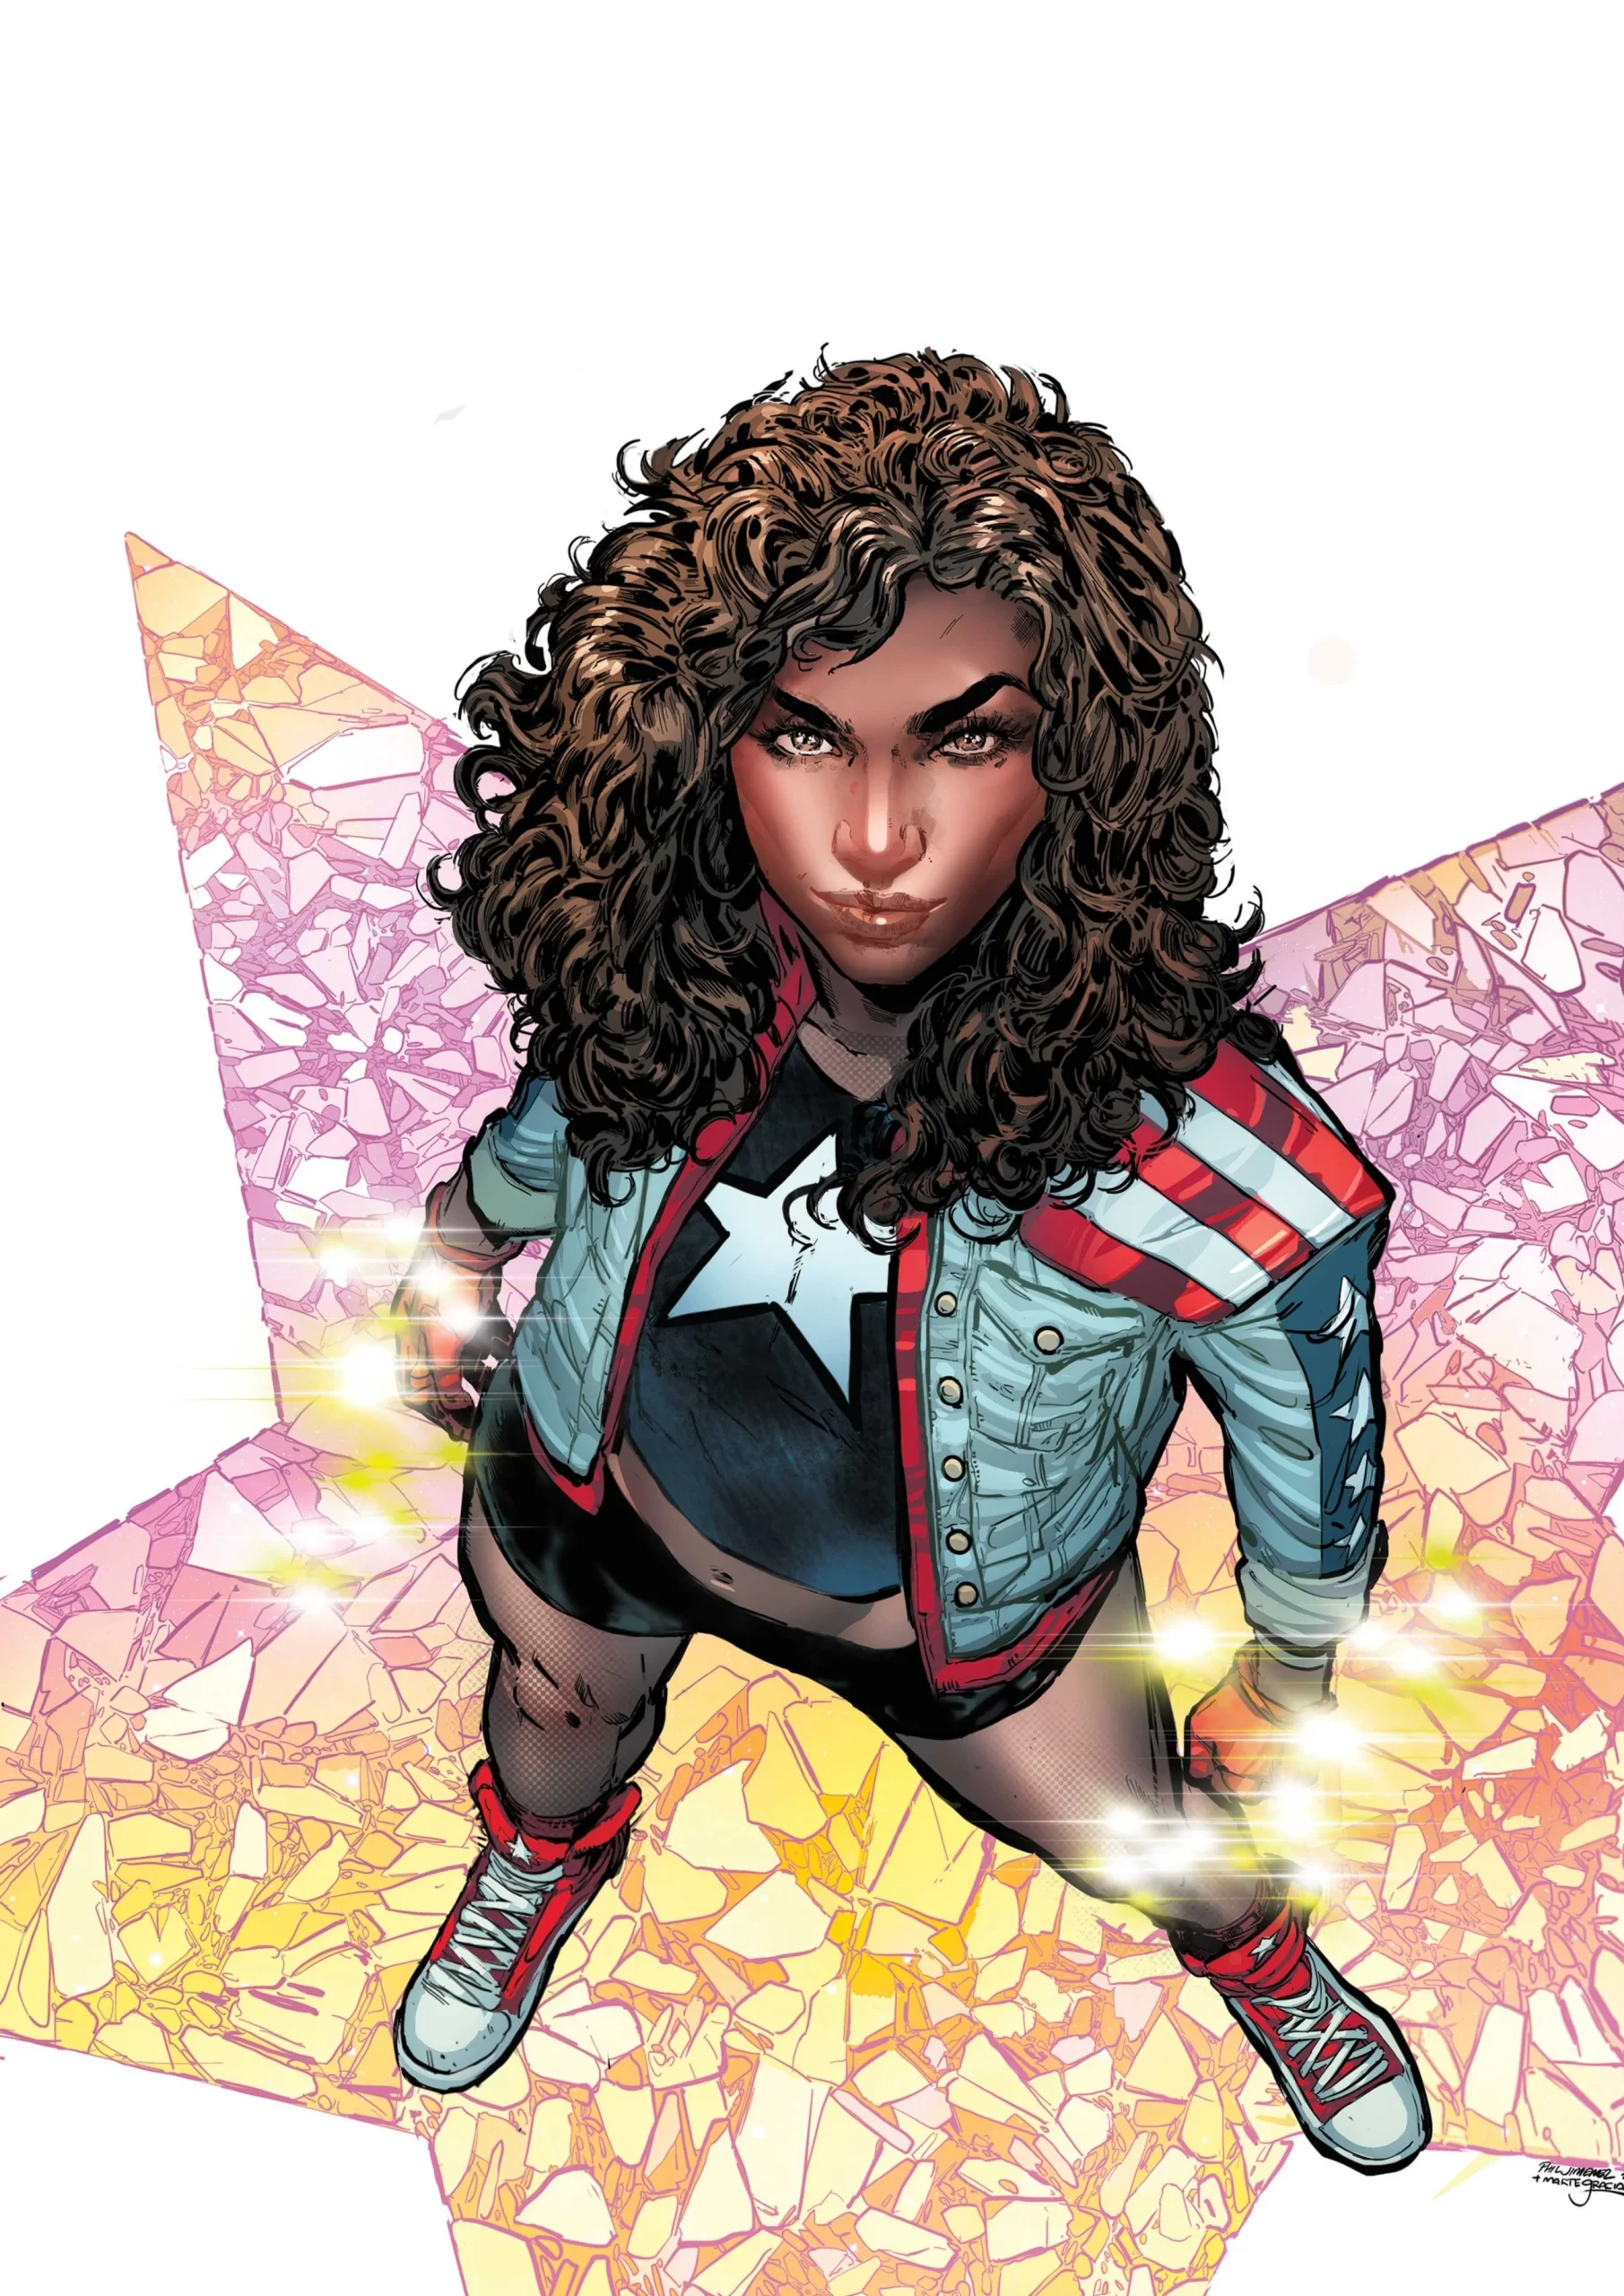 WHO IS AMERICA CHAVEZ